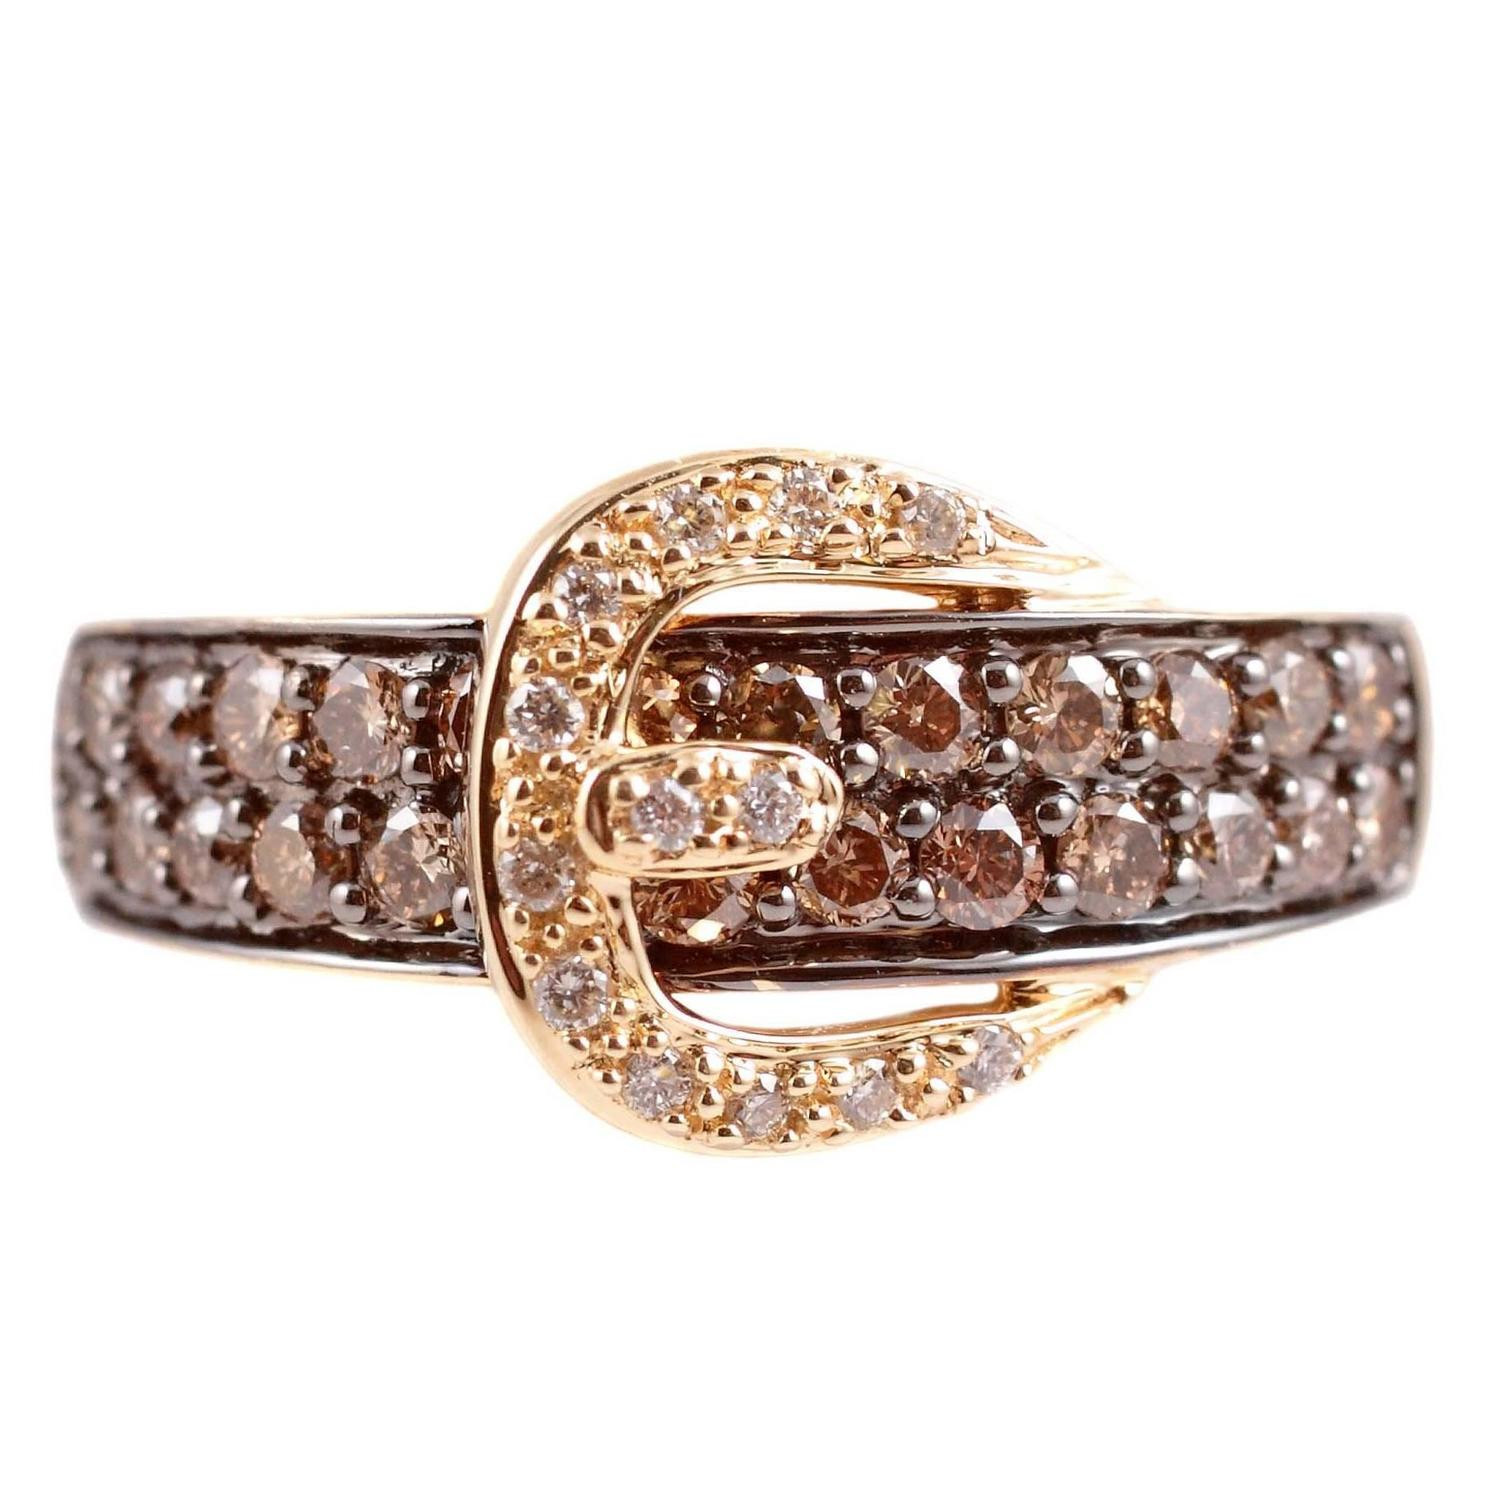 Chocolate Diamond Rings For Sale
 LeVian Brown Diamond Gold Buckle Ring For Sale at 1stdibs